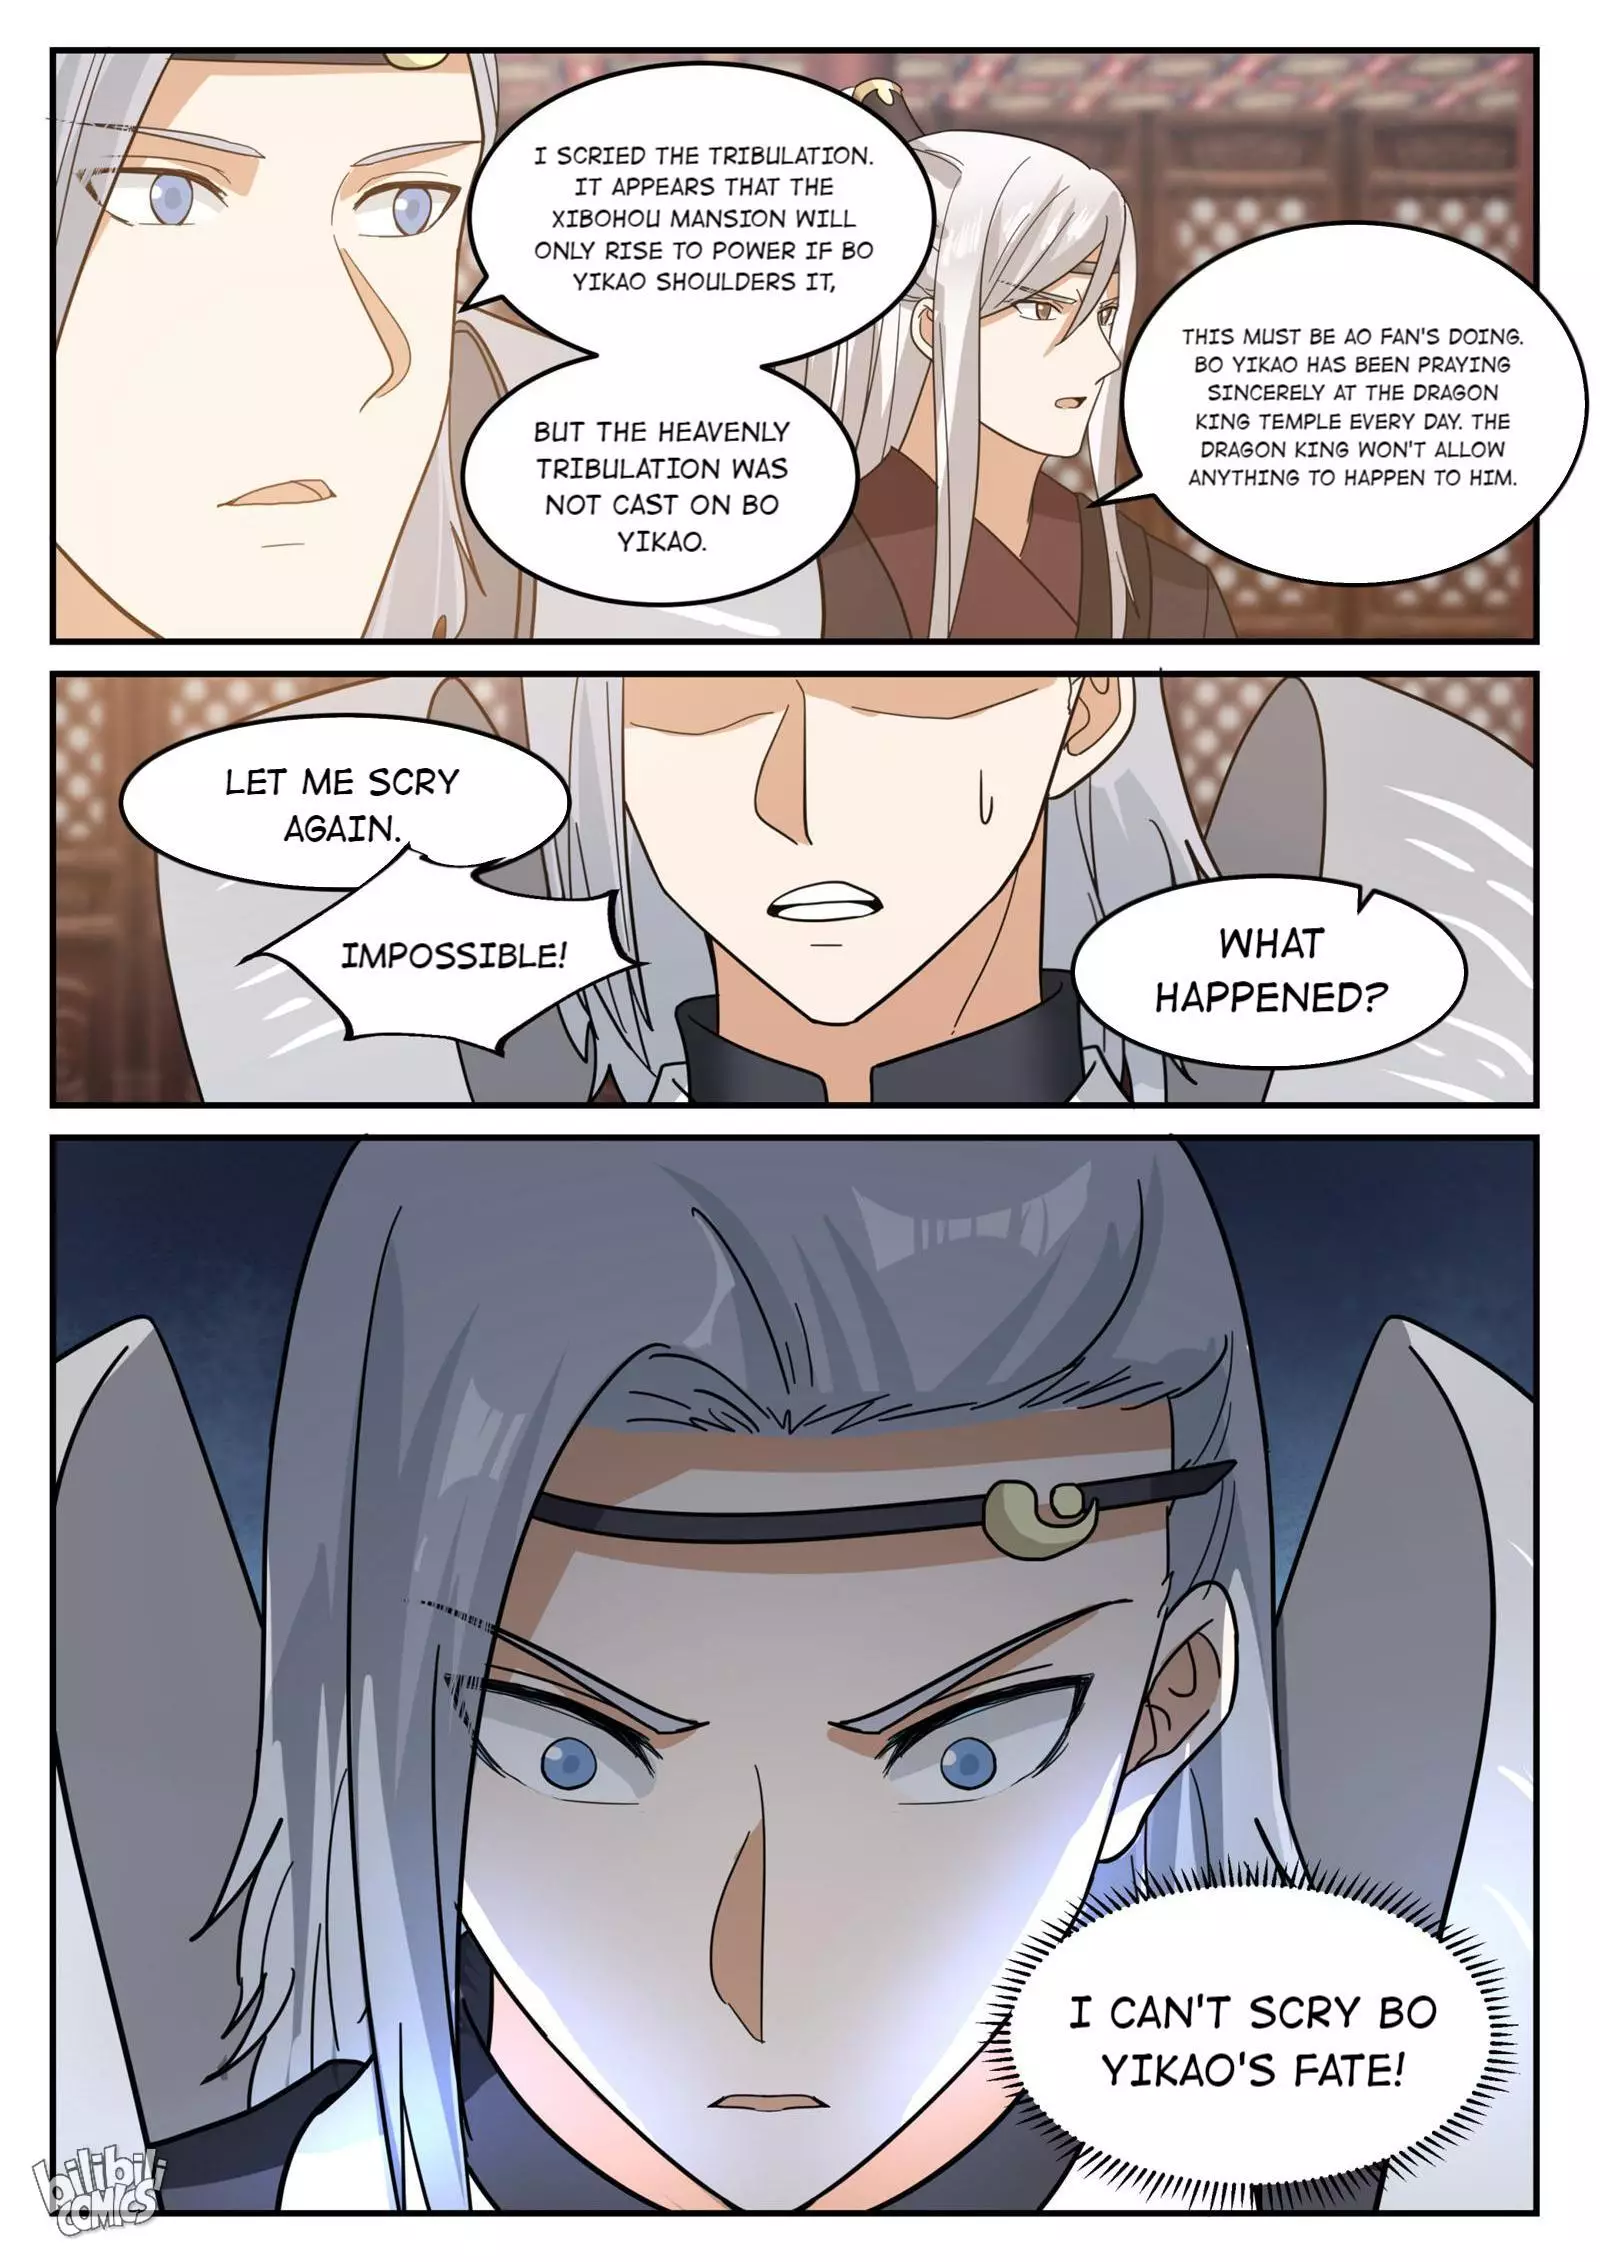 Throne Of The Dragon King - 132 page 13-94f34d47